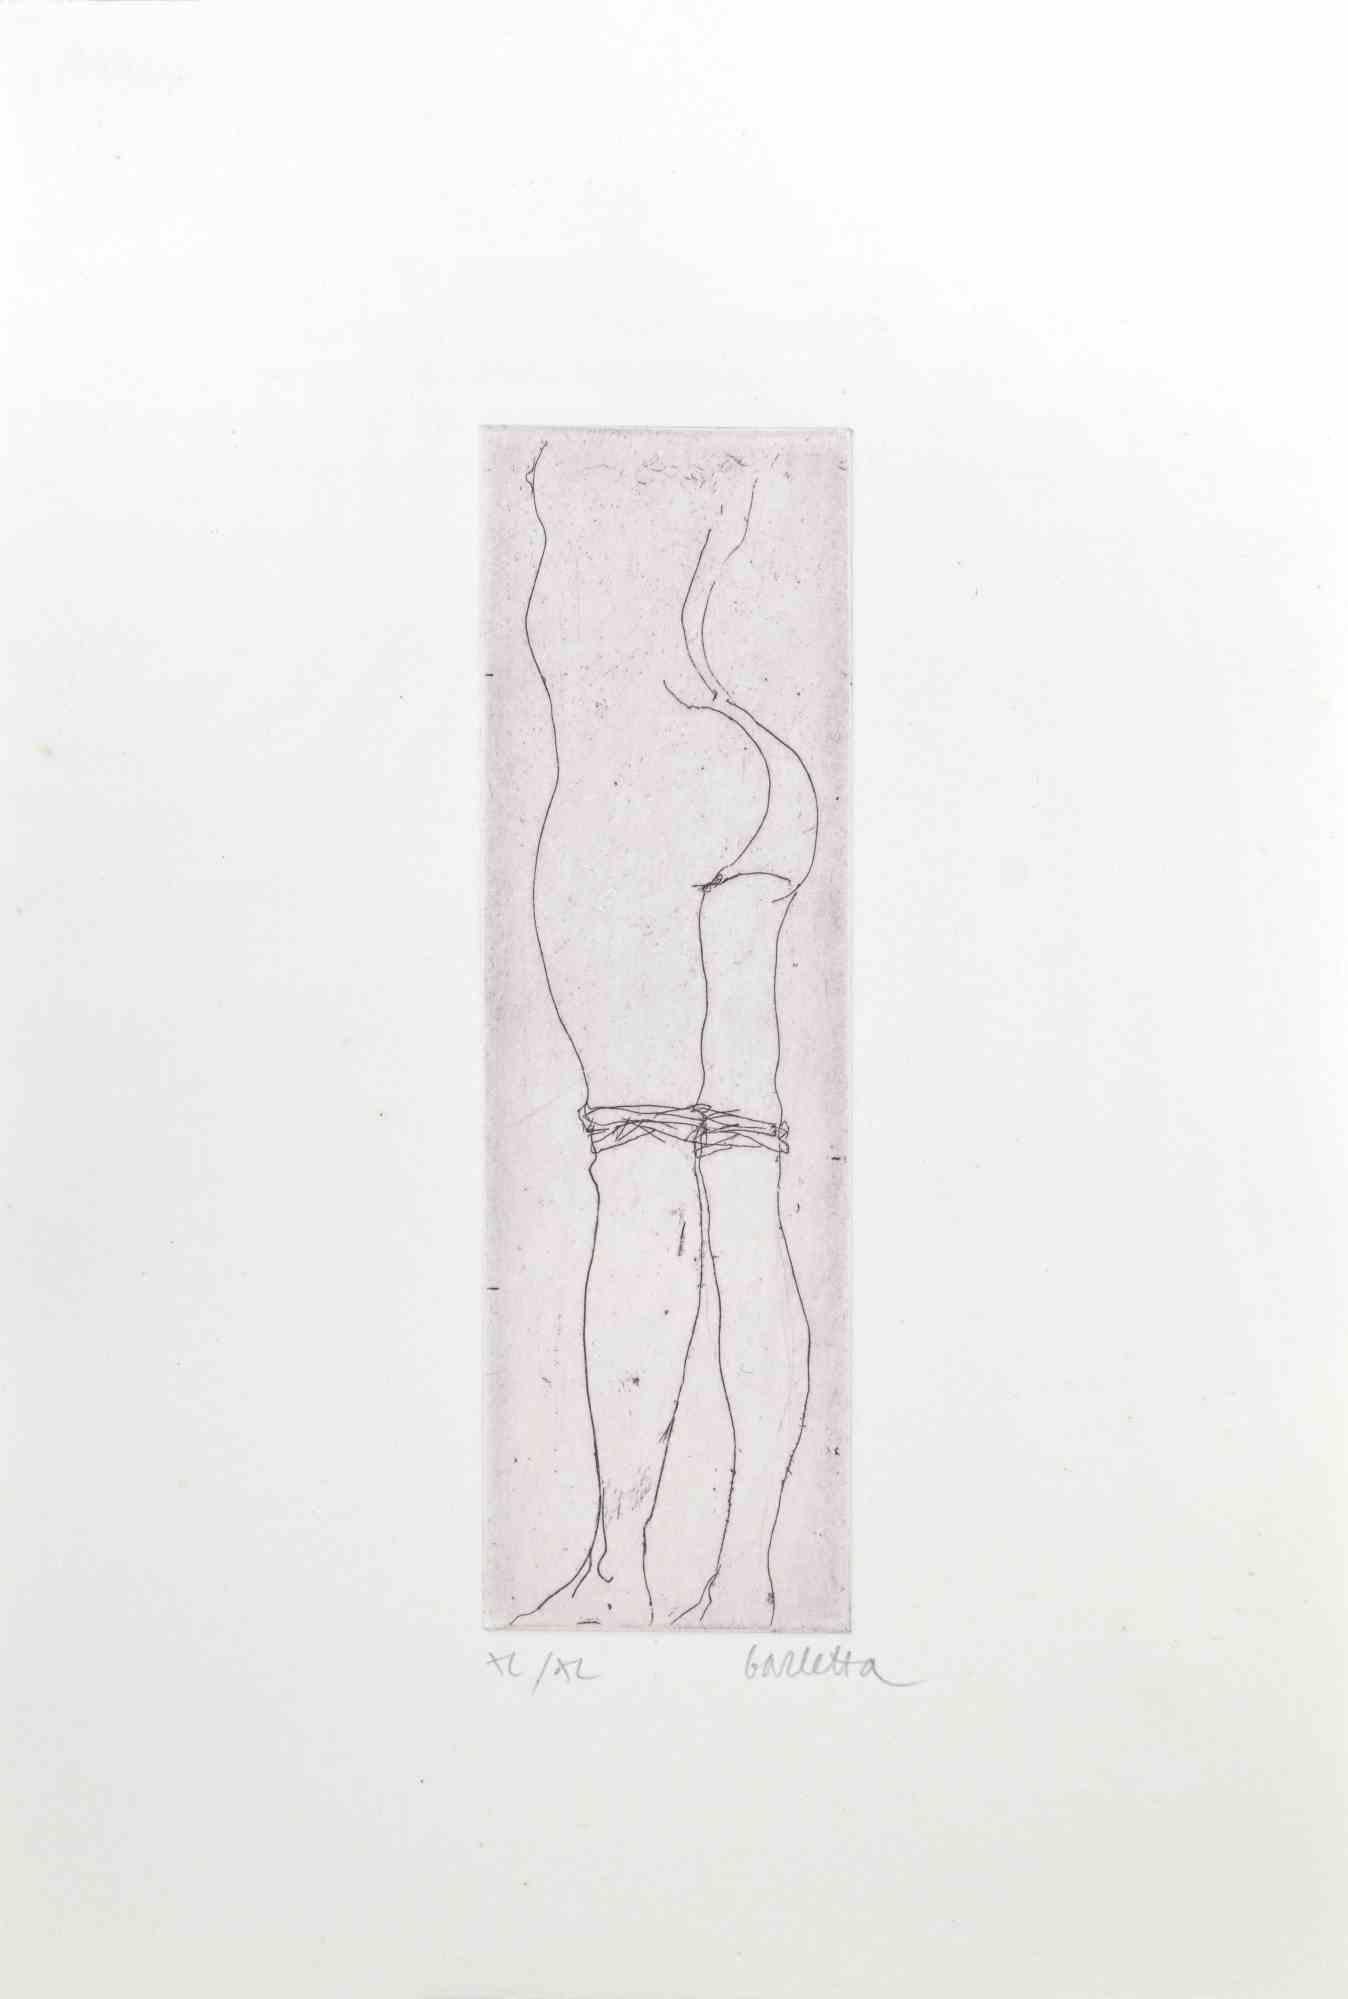 Nude is an etching on cardoboard realized by Sergio Barletta in 1974. 

sheet dimensions, 25 x 17 cm.

Edition XL/XL

Handsigned in pencil in the lower right margin.

Good condtions
